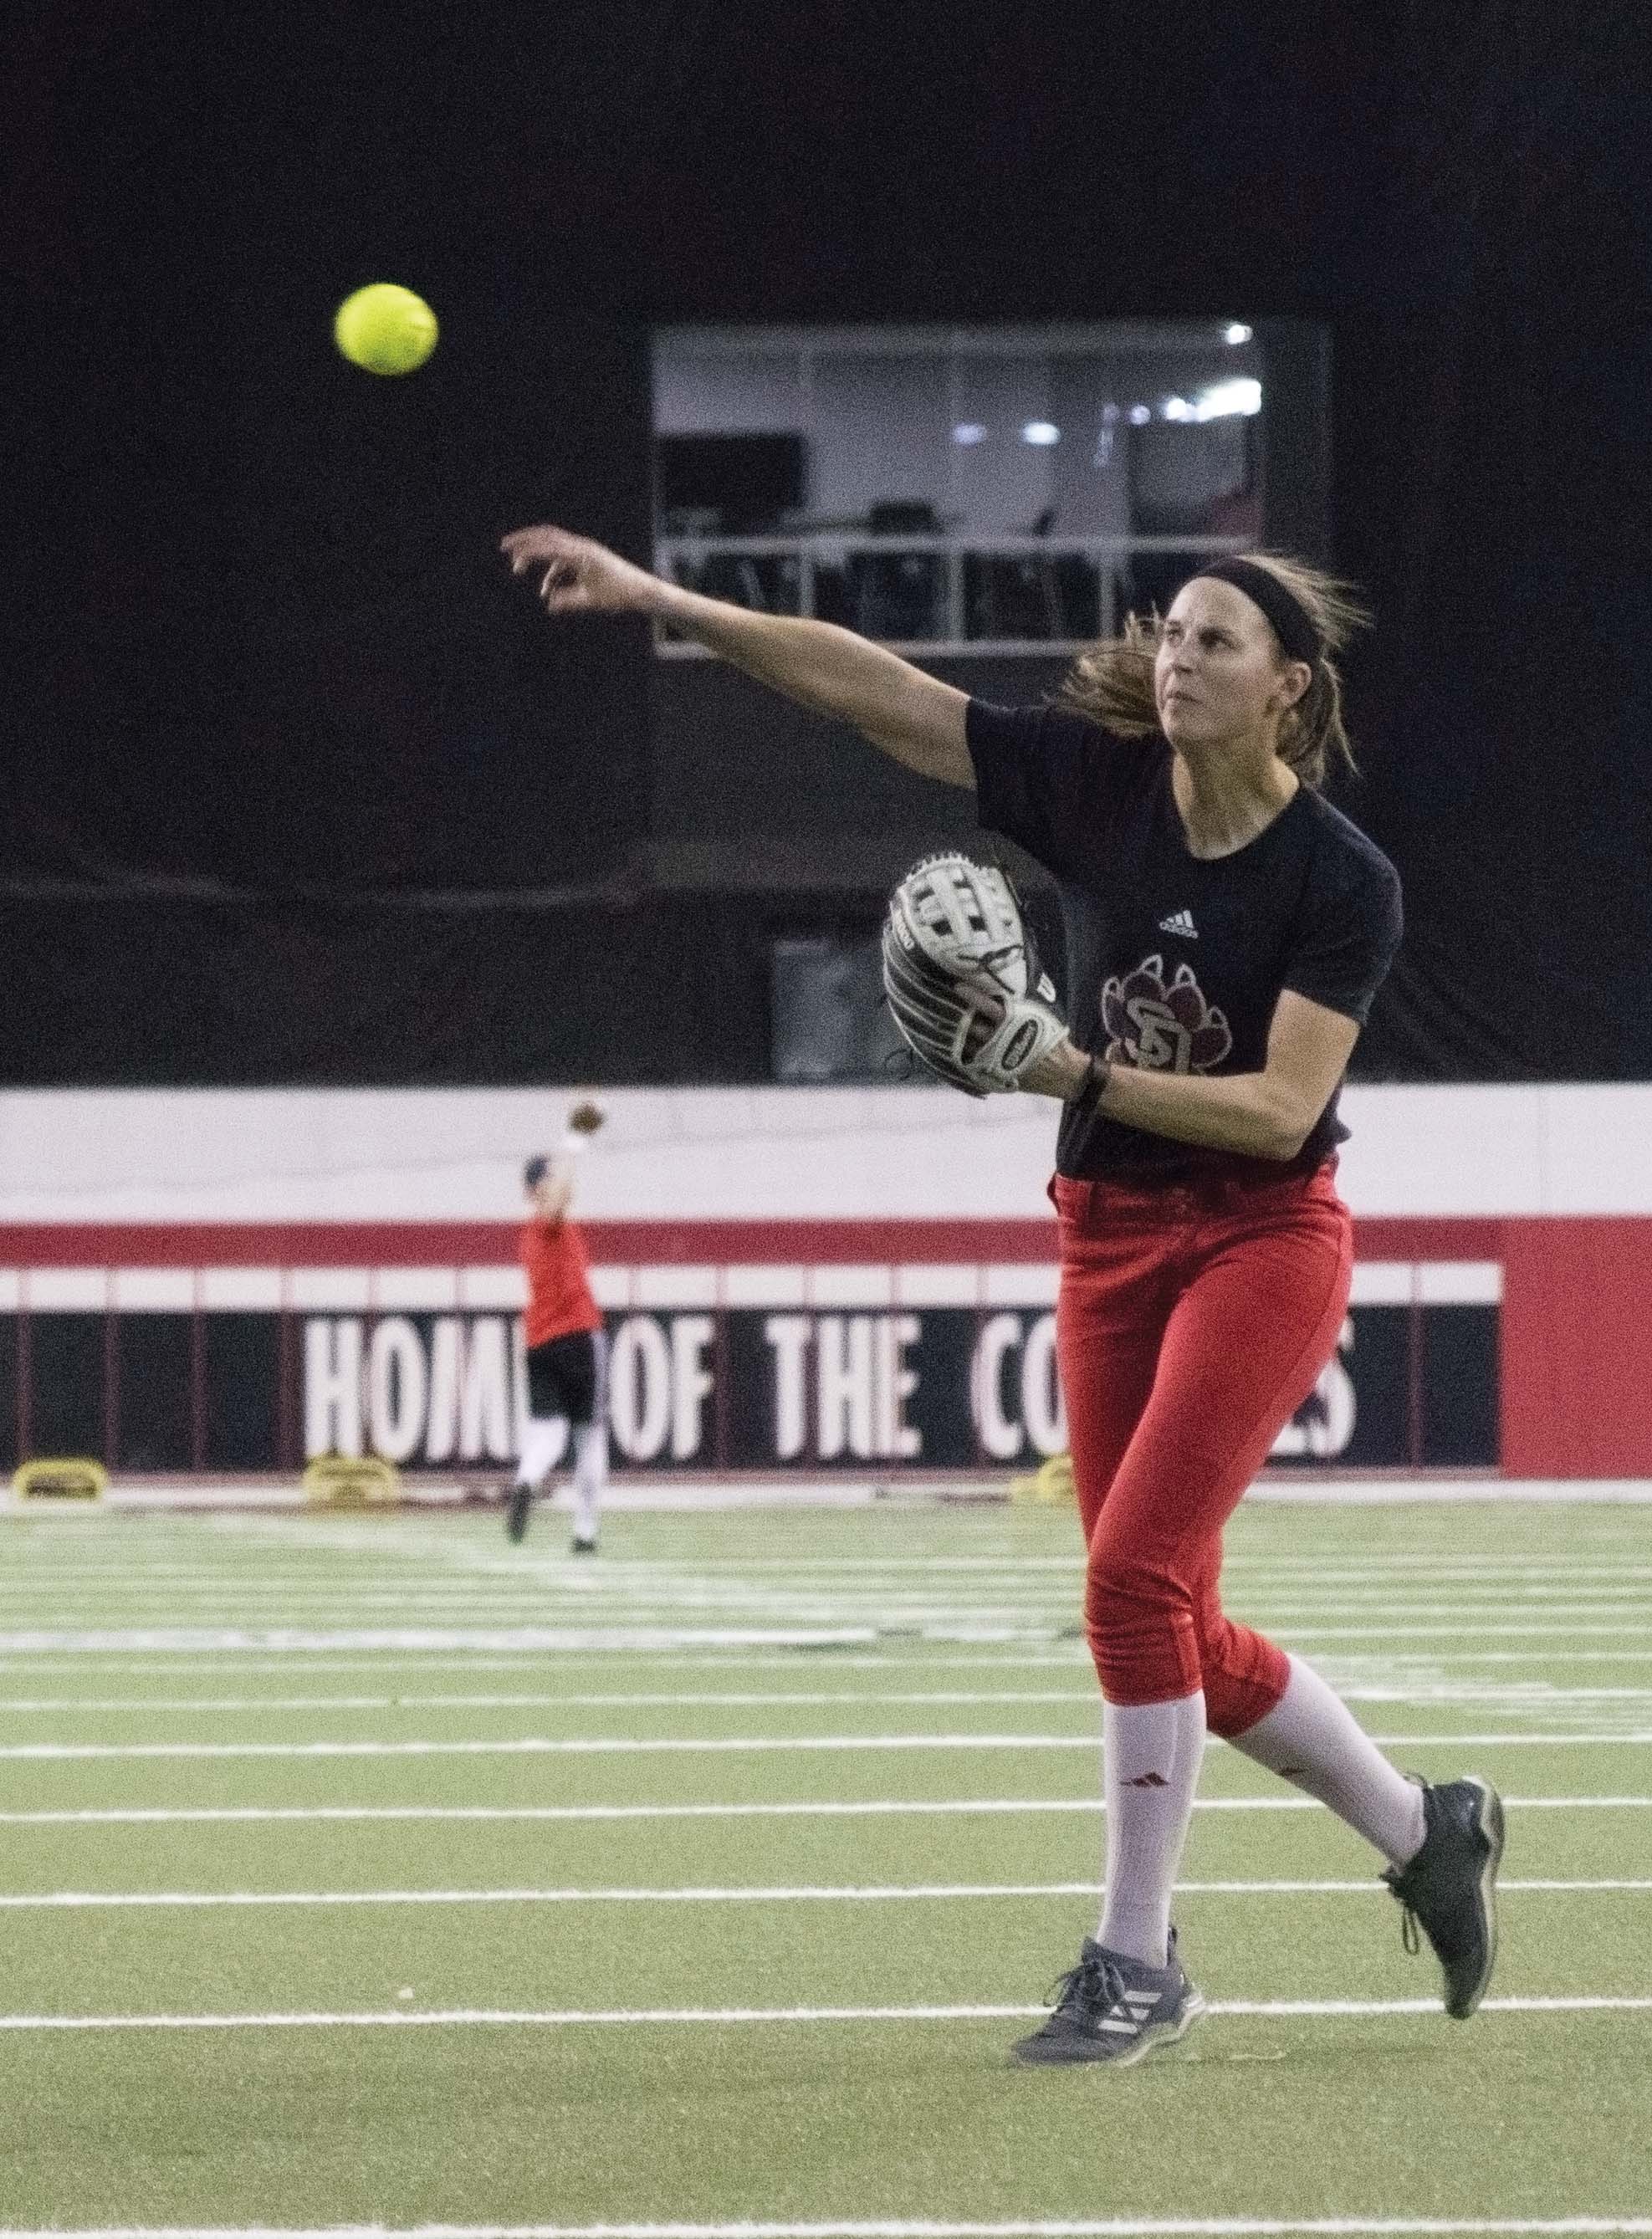 USD softball team making steady improvements heading into conference play   